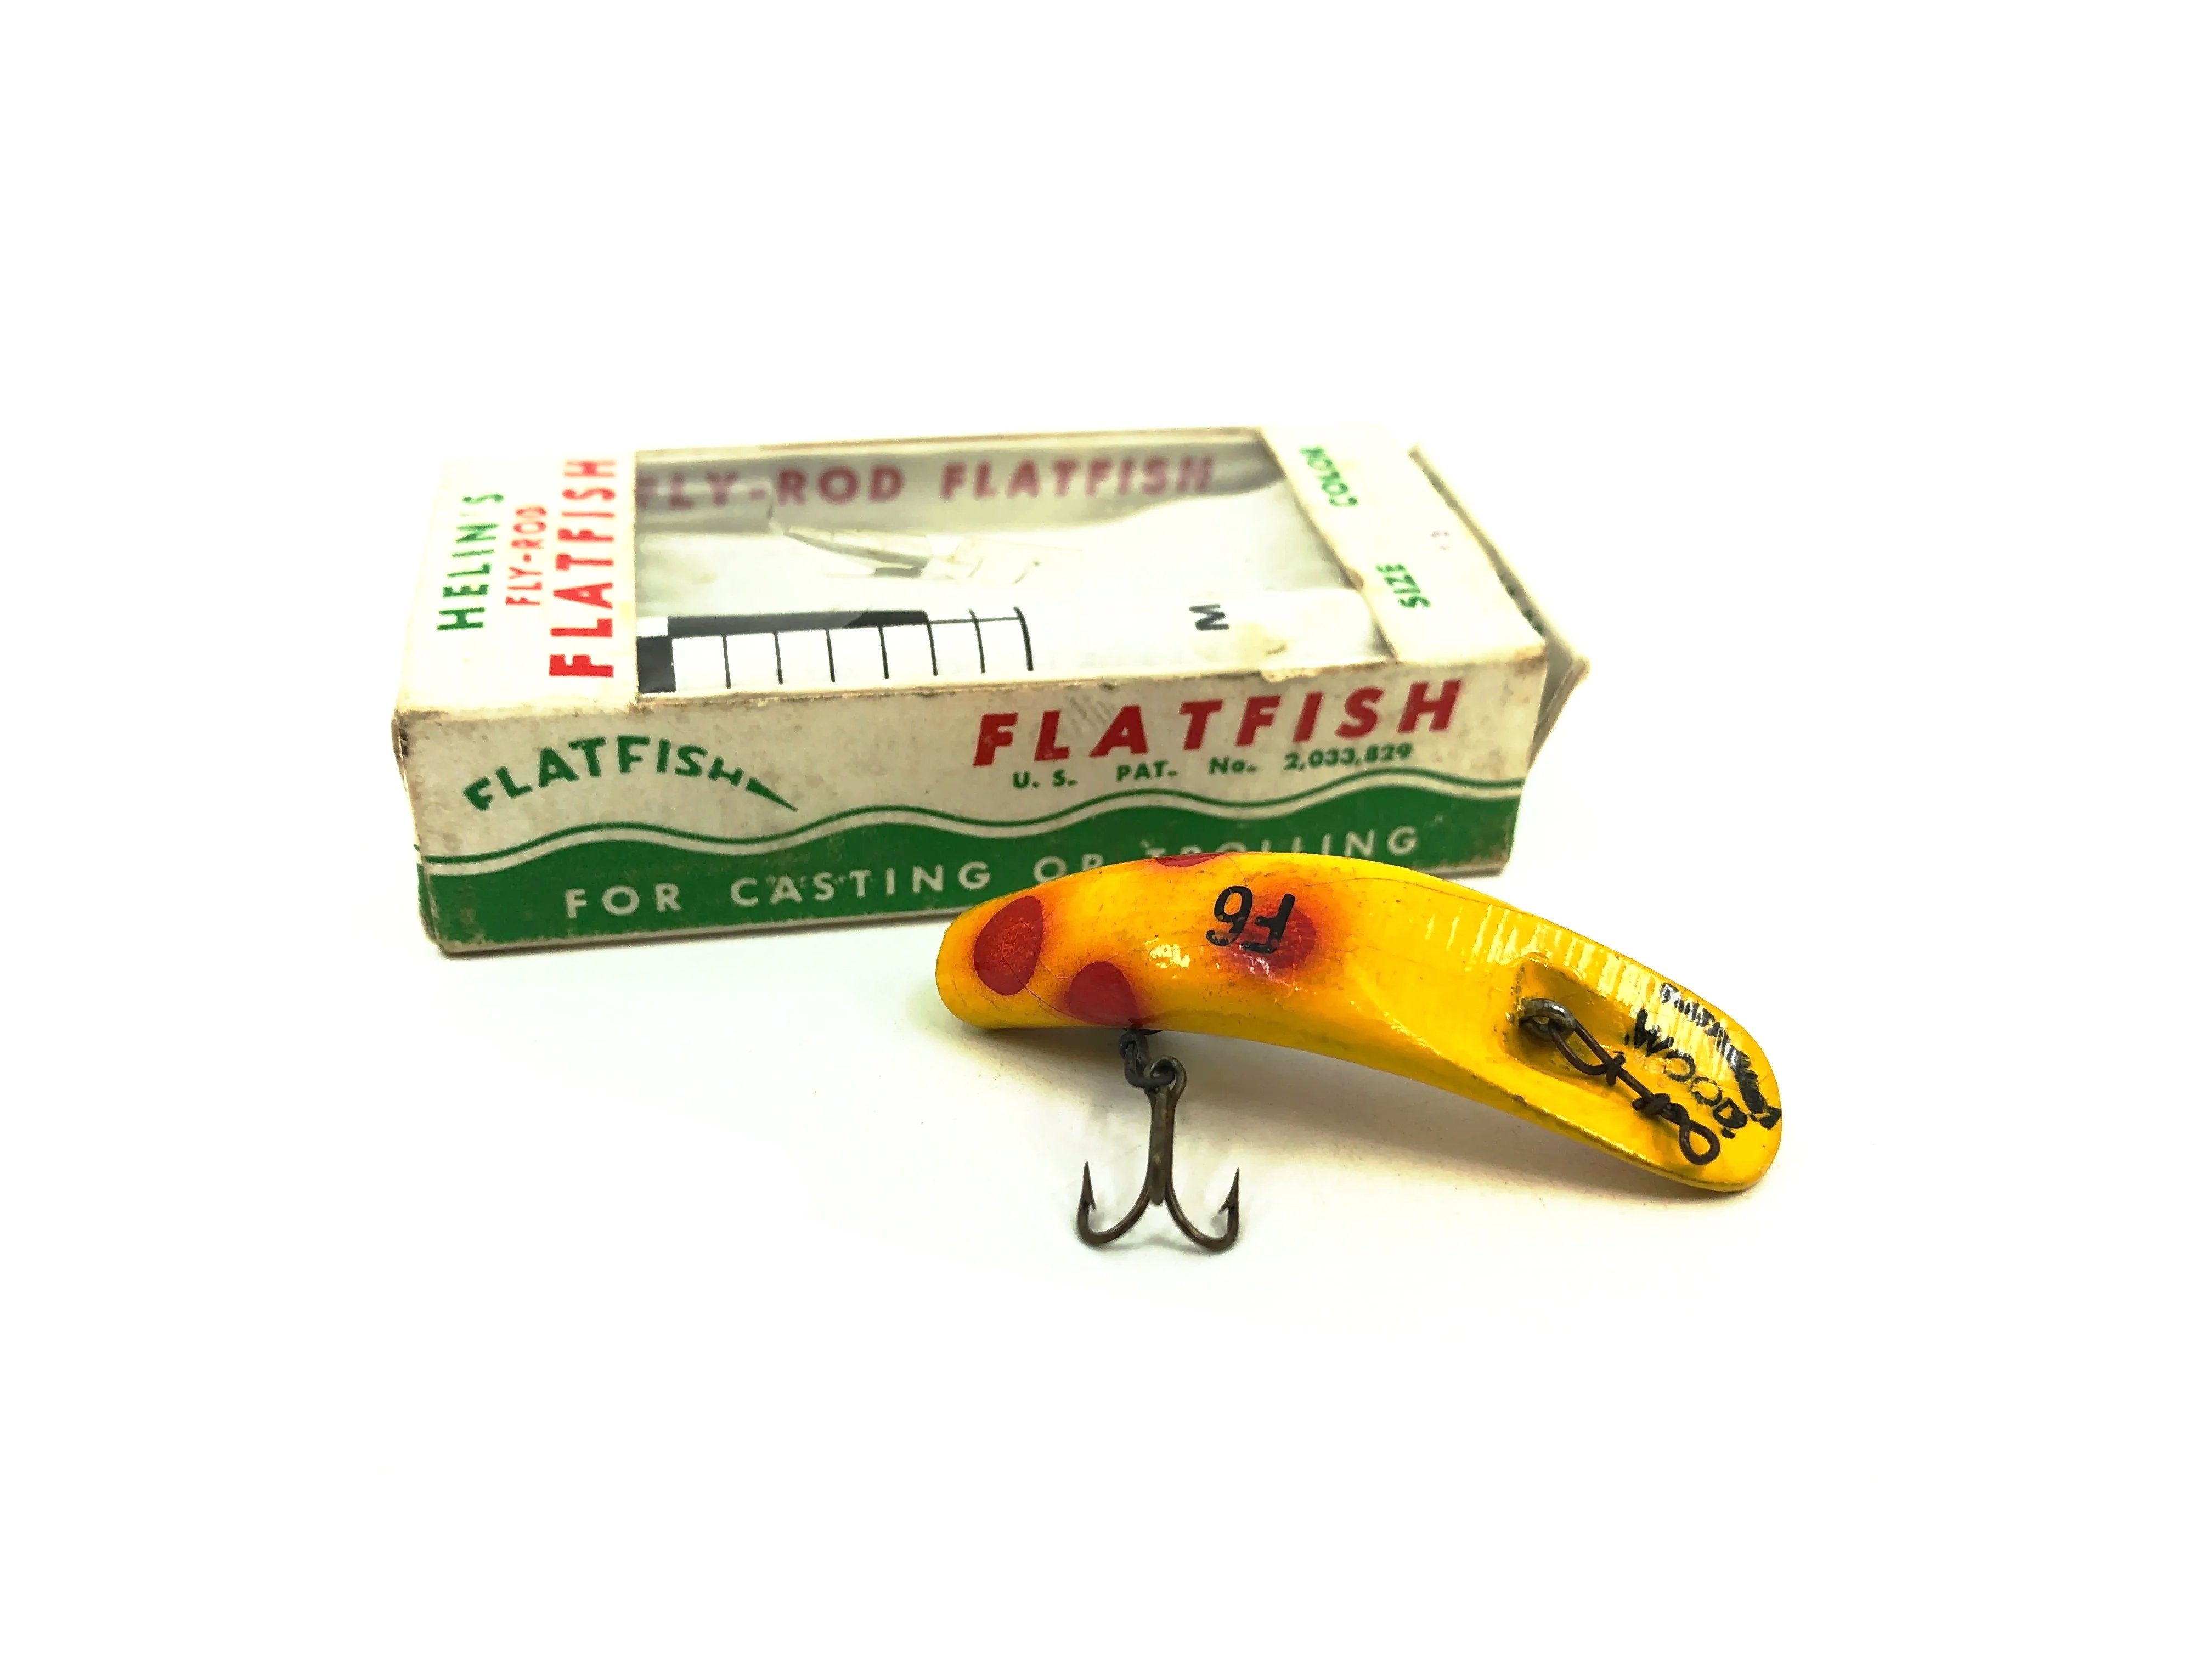 Helin Flatfish F6, White with Spots Color-Wooden – My Bait Shop, LLC